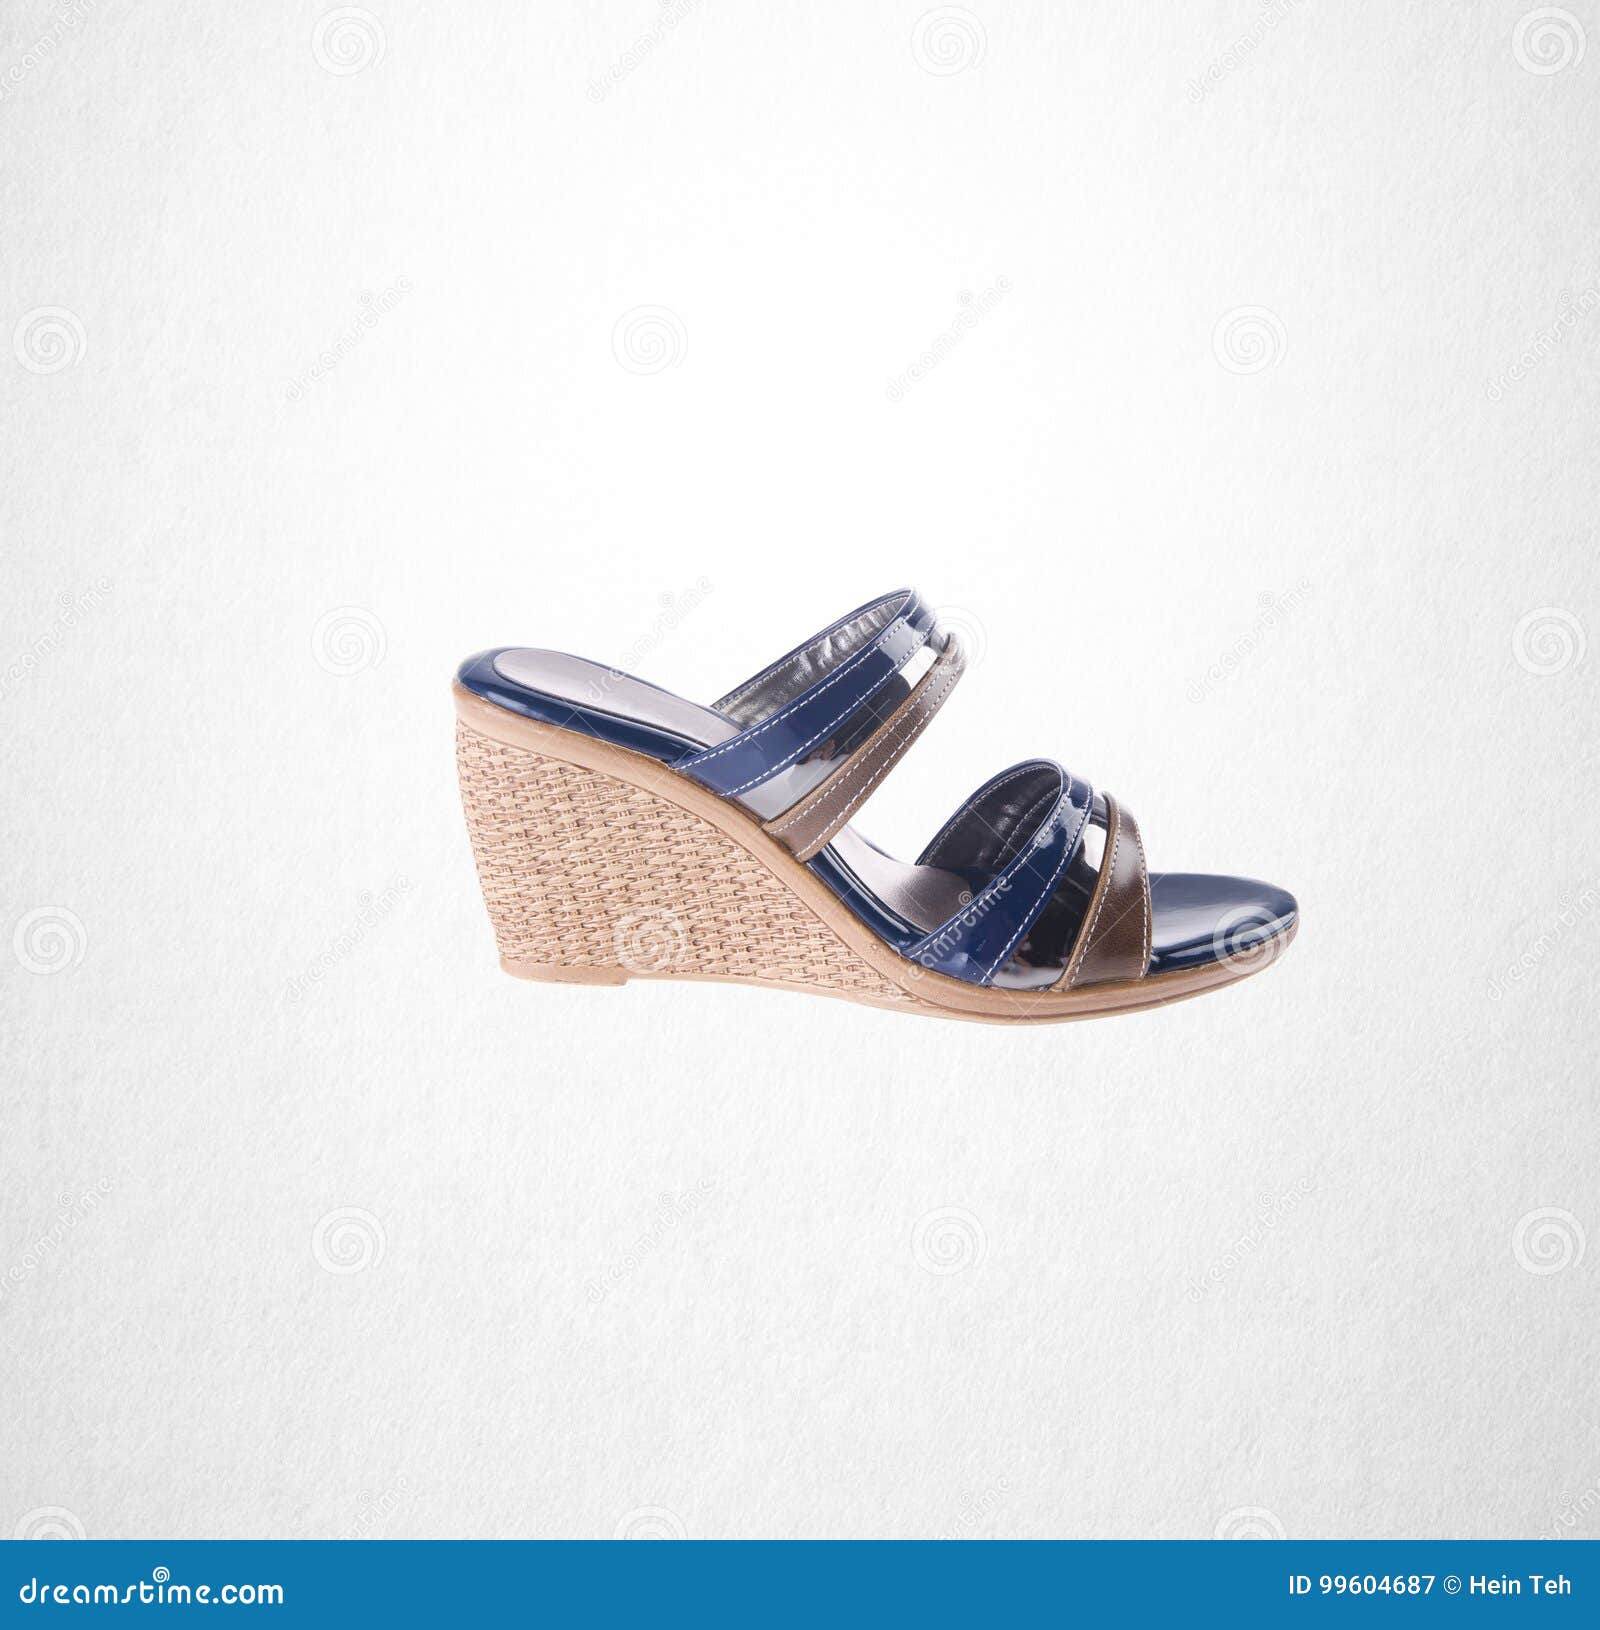 Shoe or Blue Color Lady Shoes on a Background. Stock Image - Image of ...